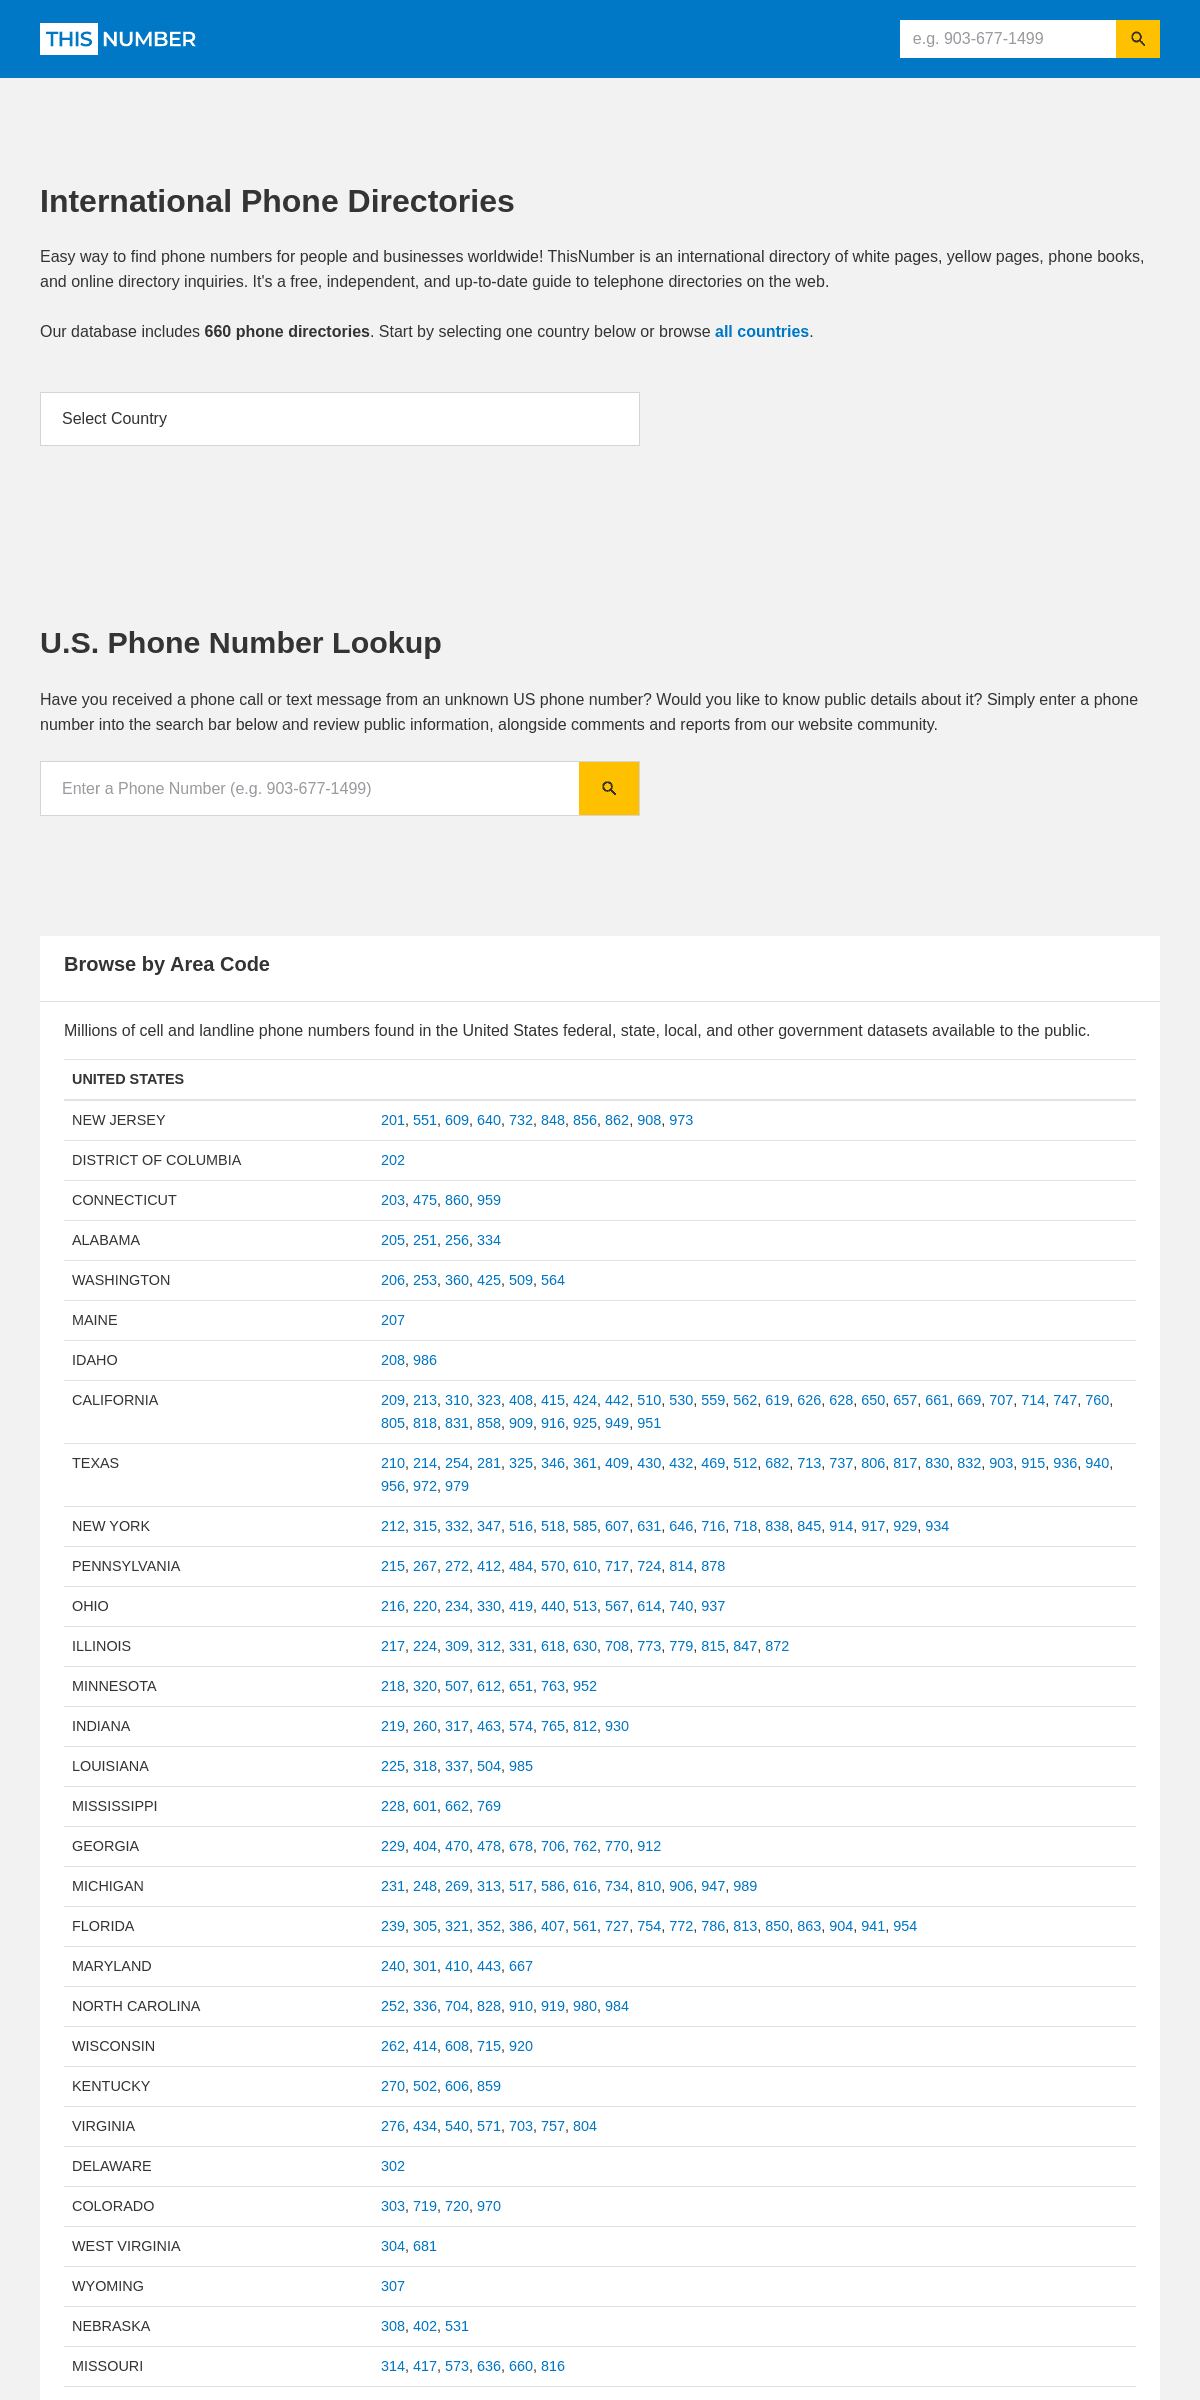 A complete backup of thisnumber.com